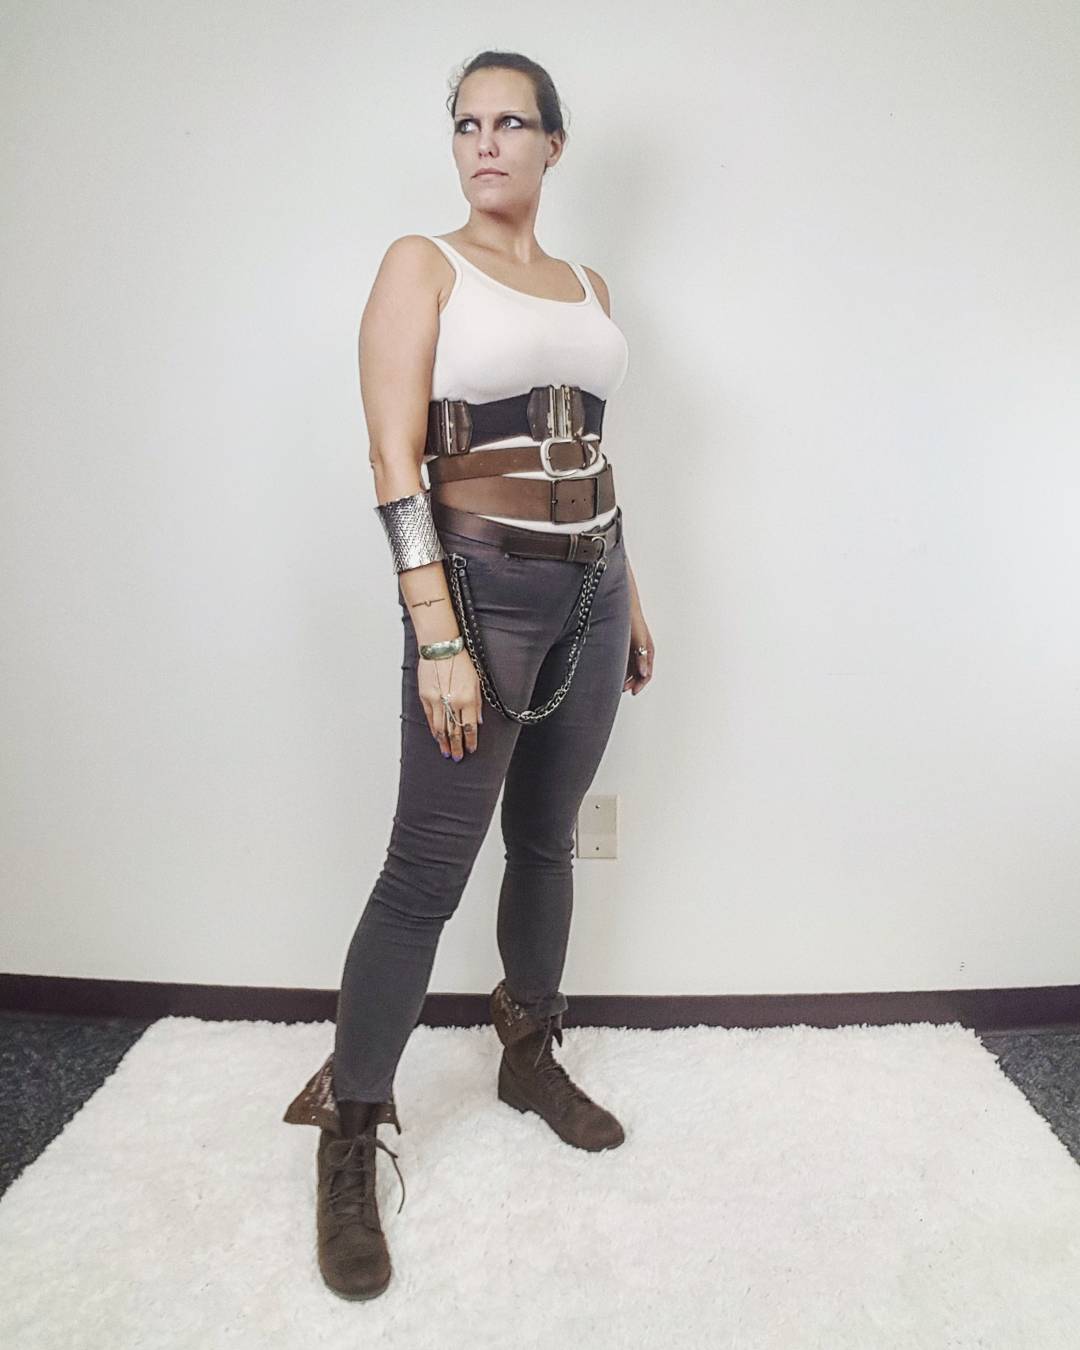 Thrift Store Cosplay Day 8 Imperator Furiosa from Mad Max Fury Road fashion blog post Charlize Theron